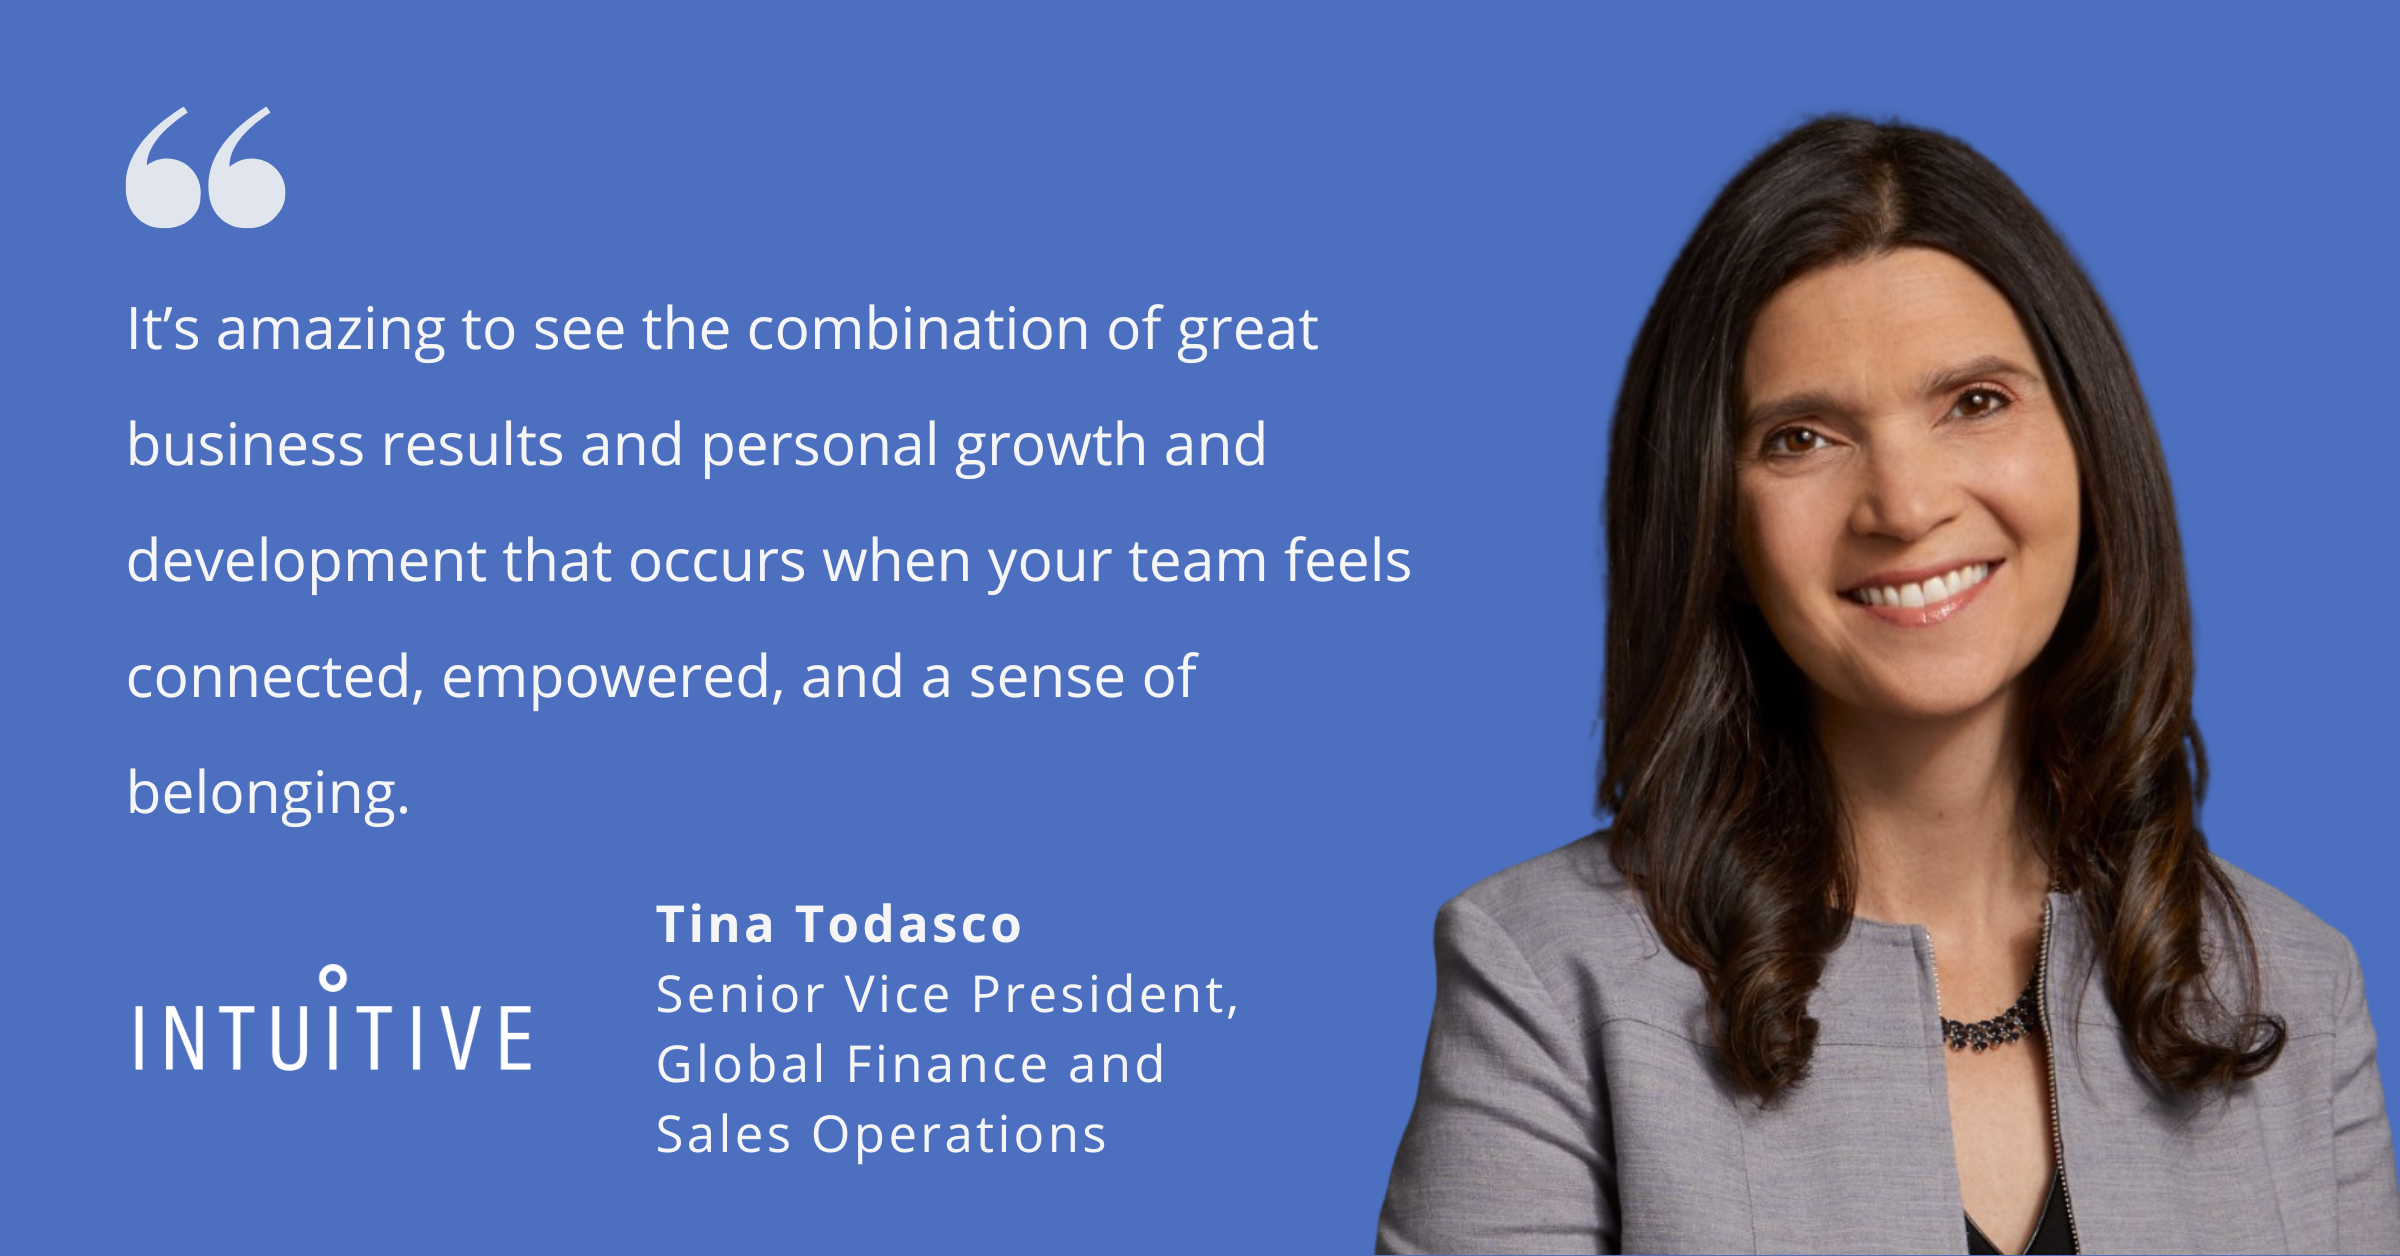 5 Practices to Invest in Your Team’s Growth From Intuitive’s Tina Todasco